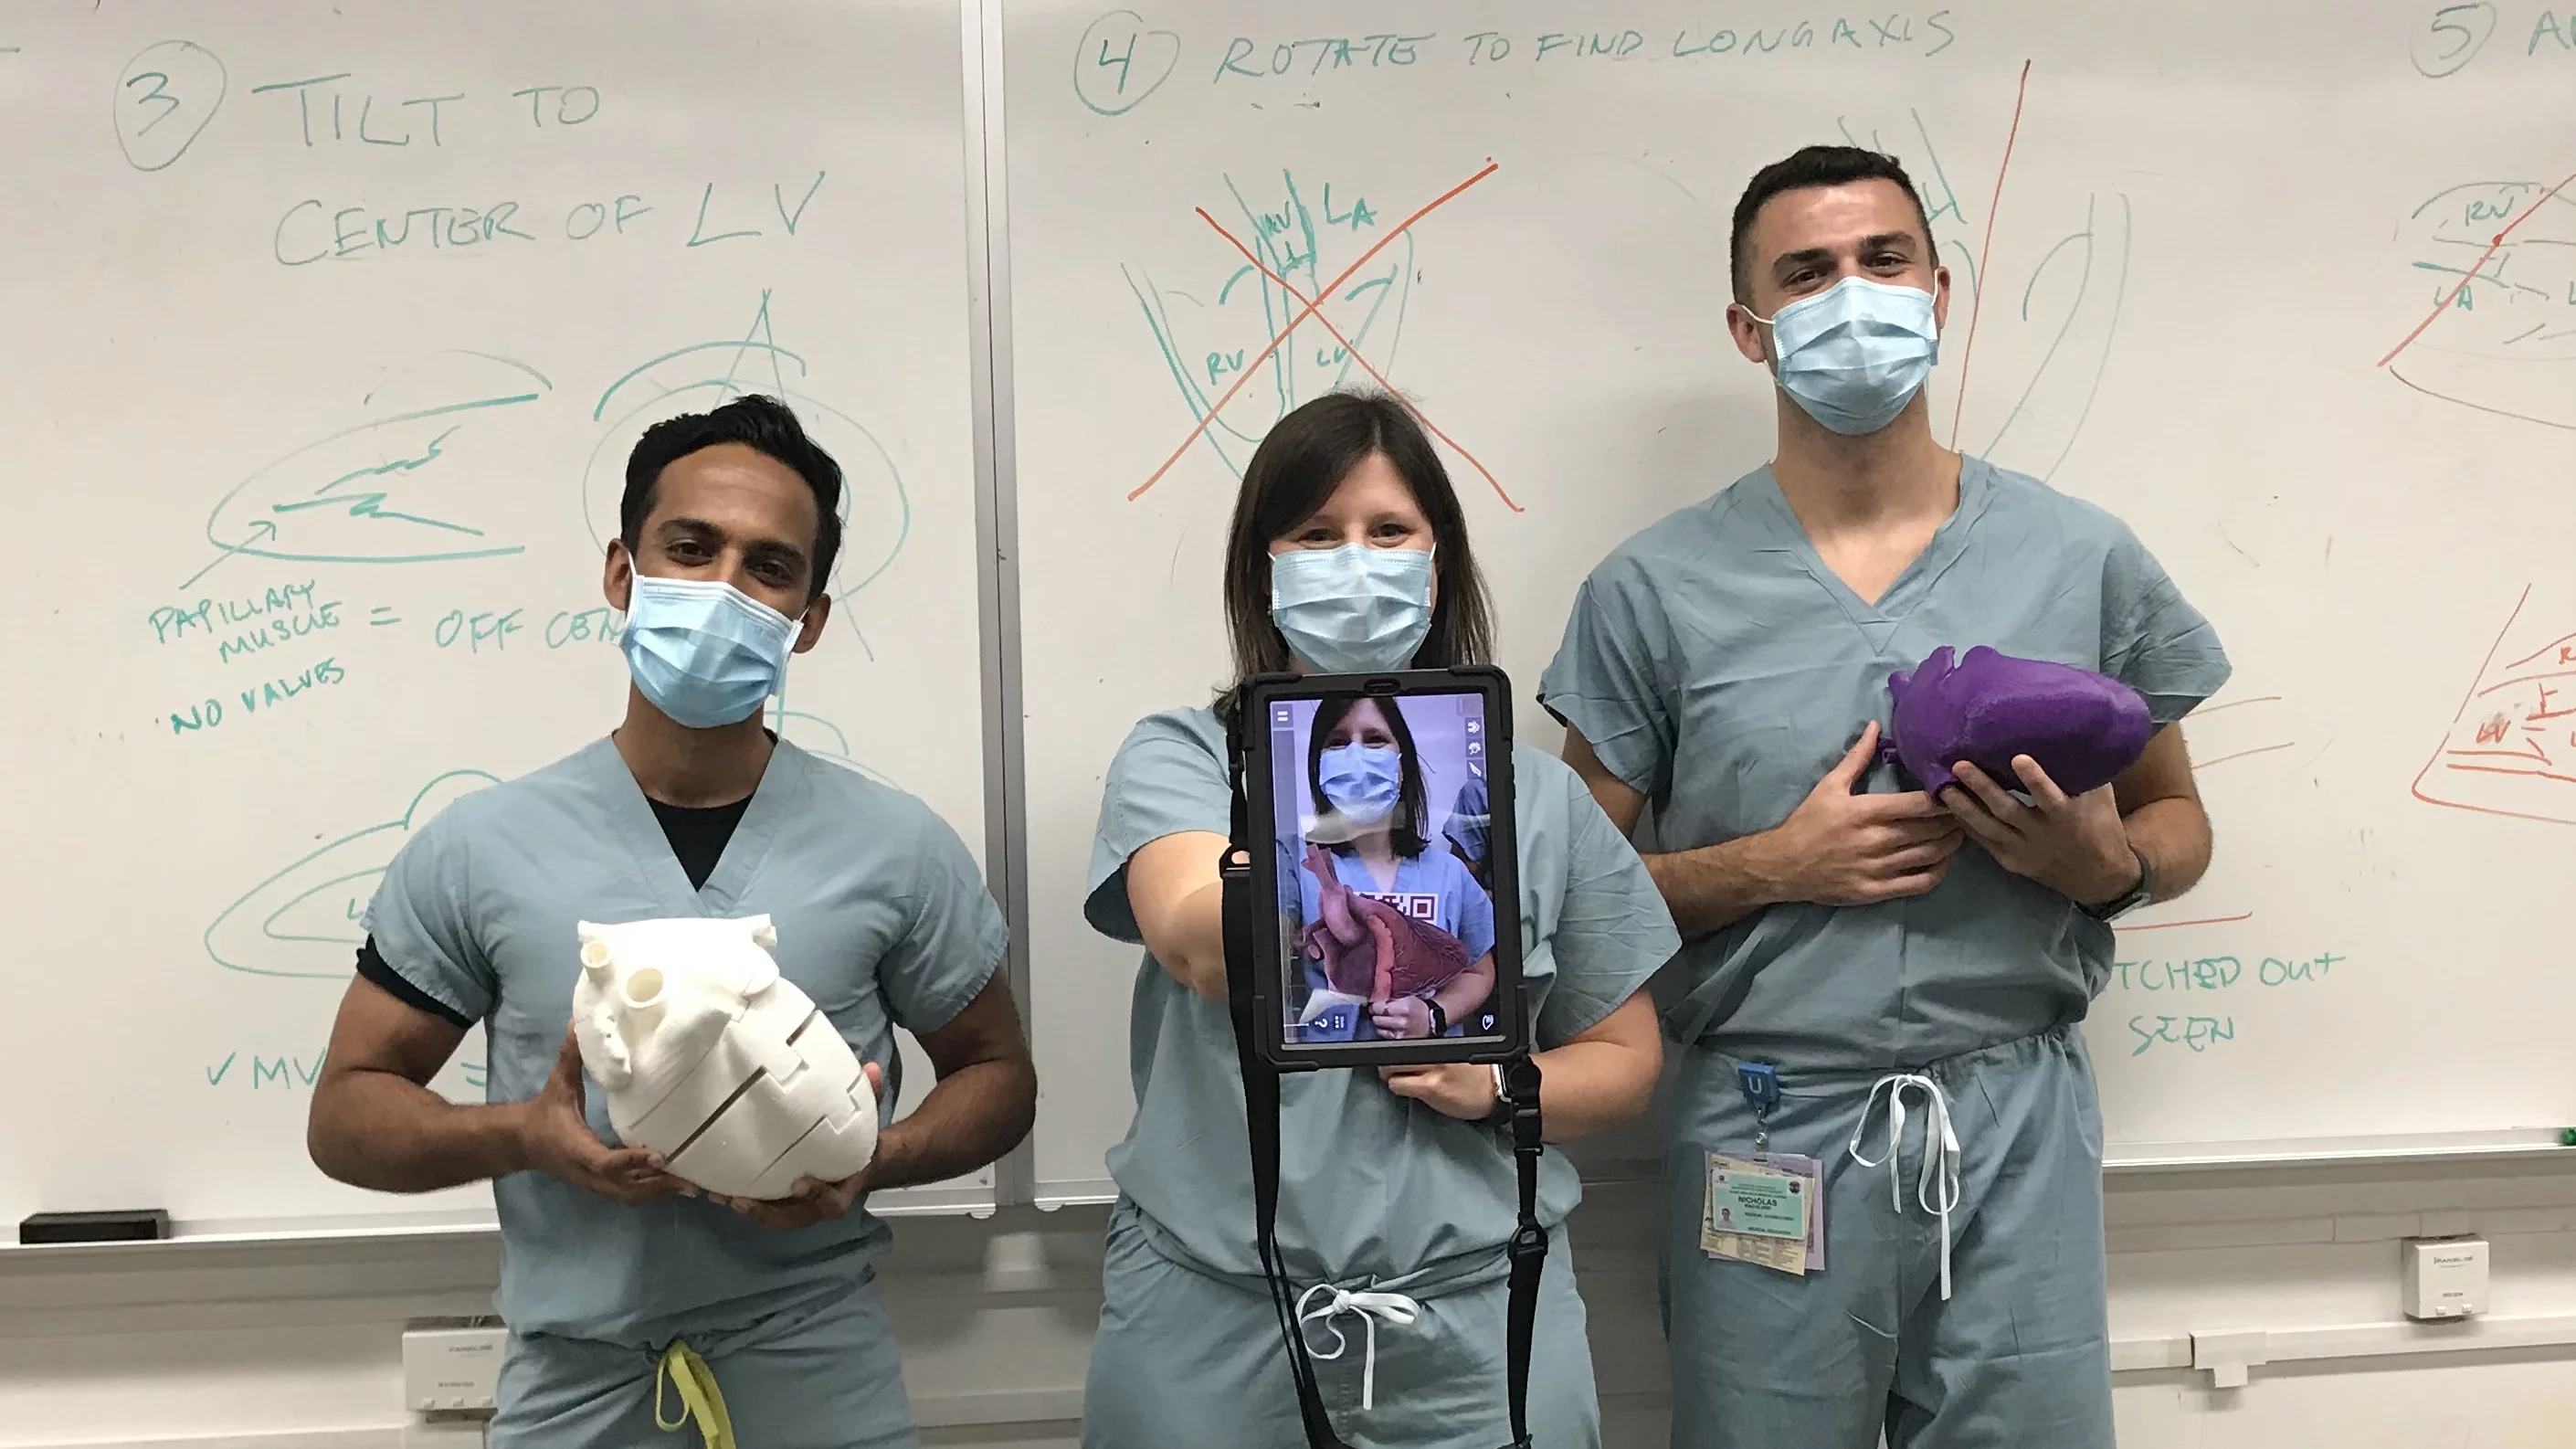 Students posing with POCUS technology